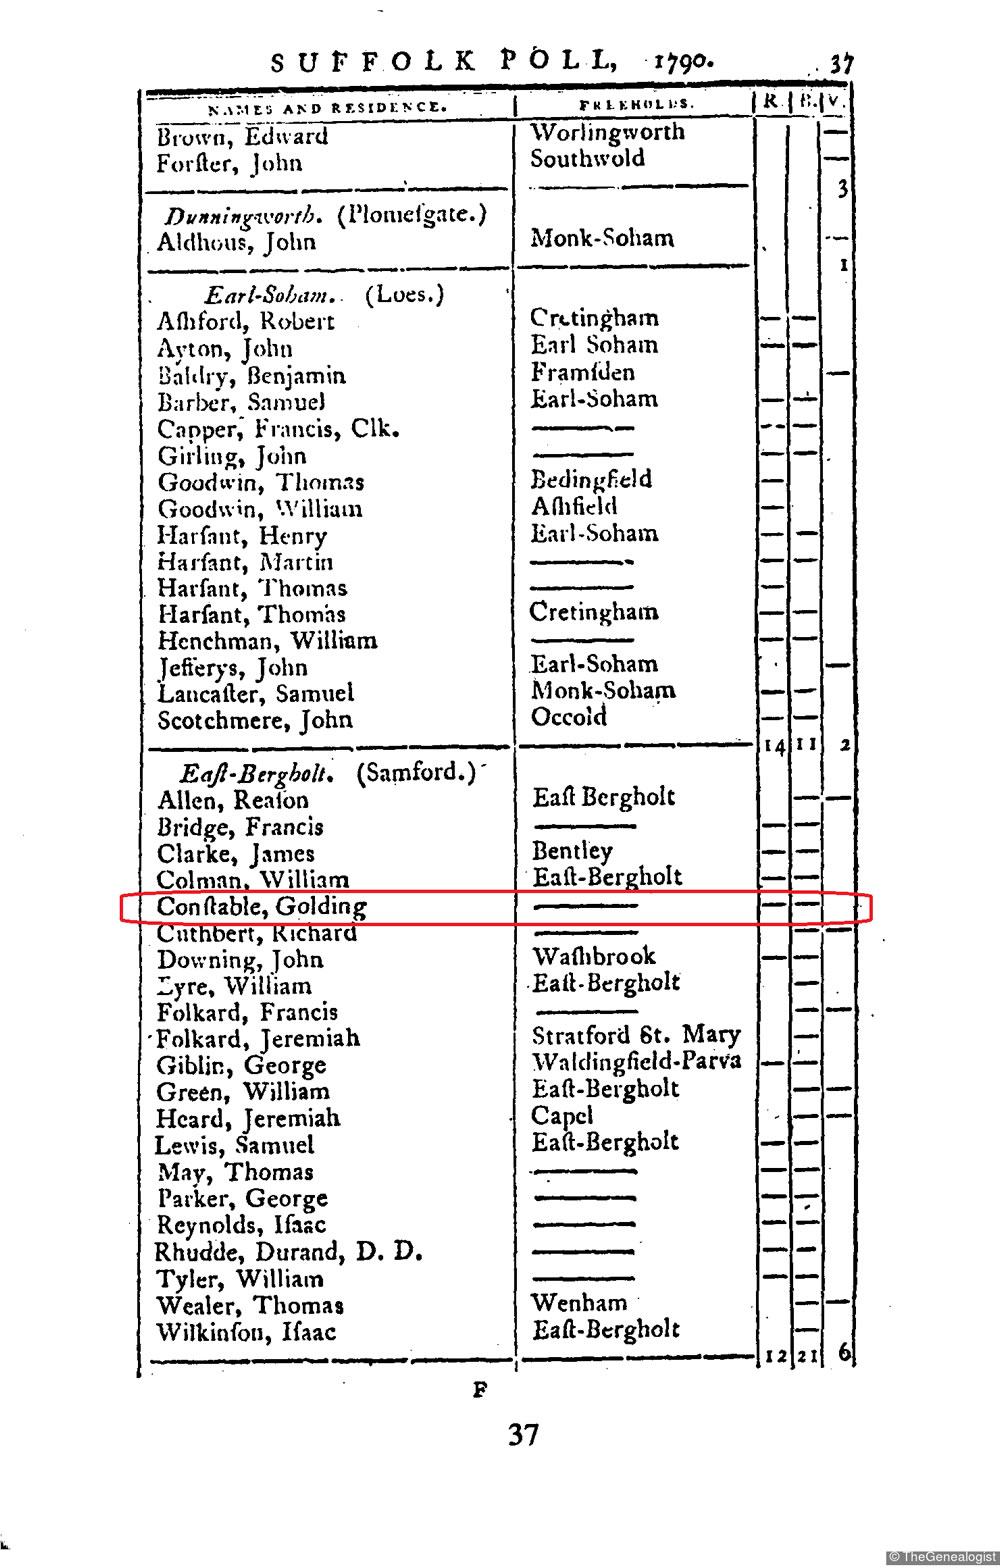 Golding Constable, father of the artist John Constable in the 1790 Poll Book on TheGenealogist